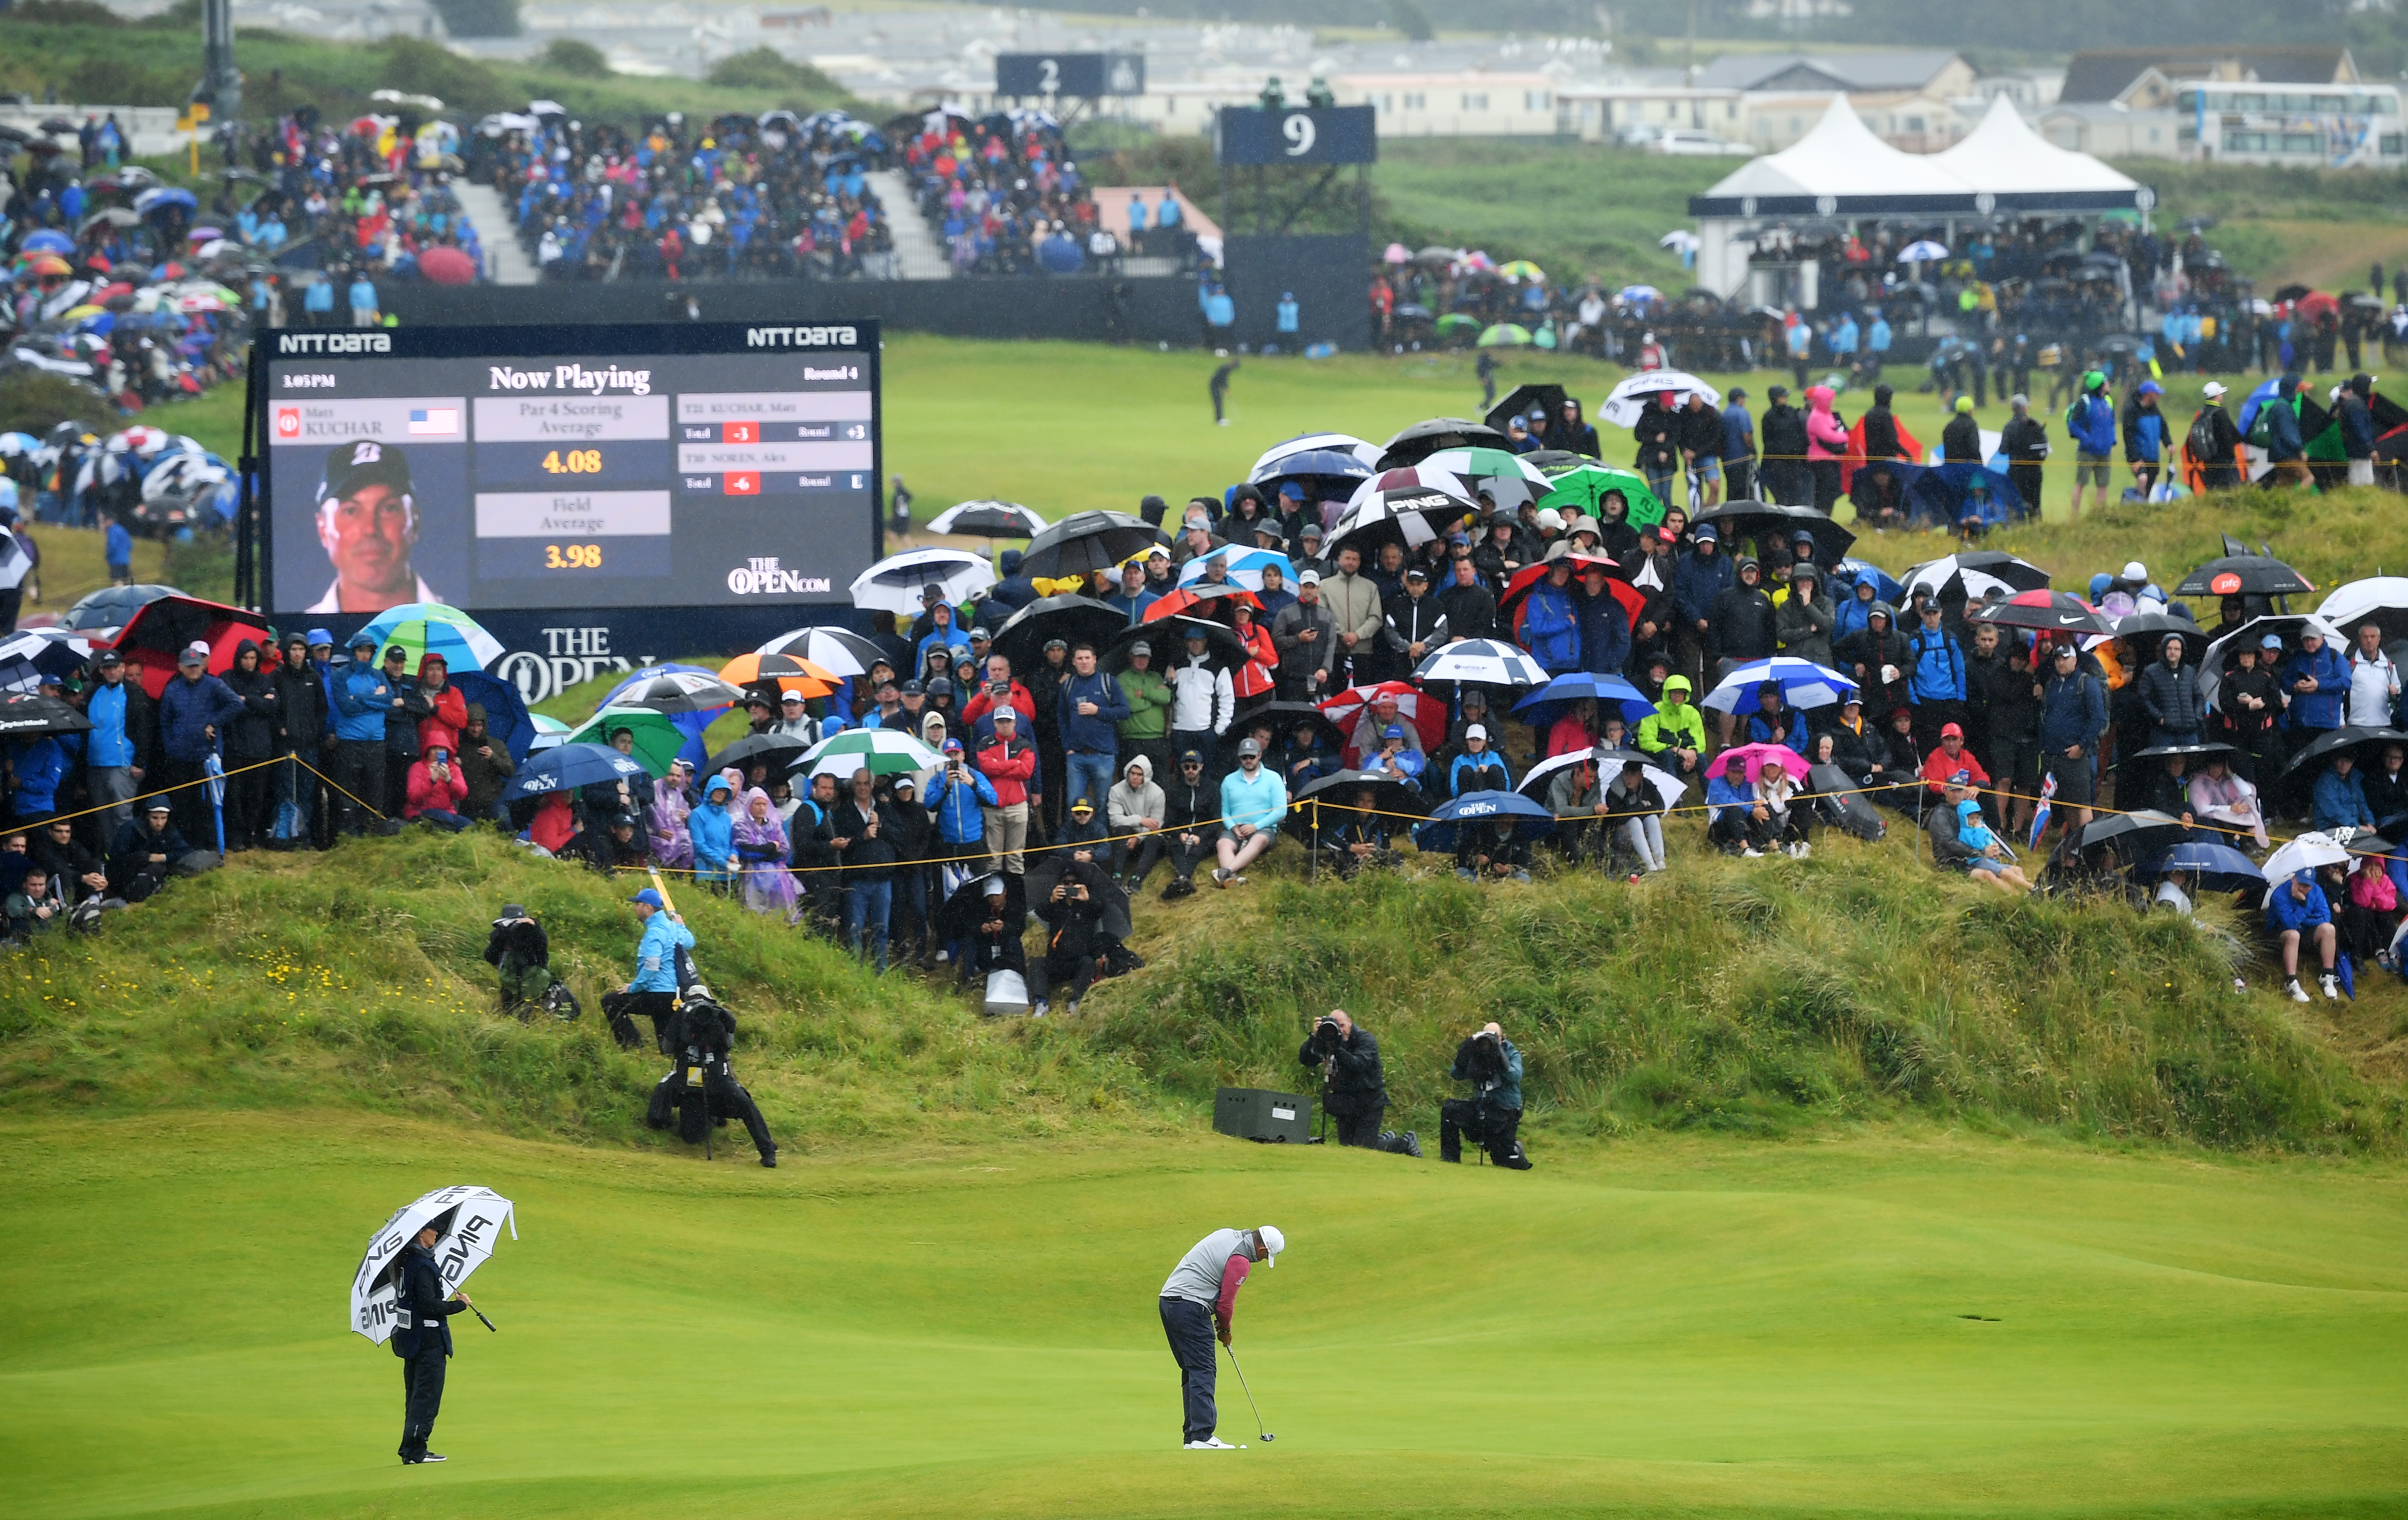 There were vast crowds at Portrush for the Open despite the weather.